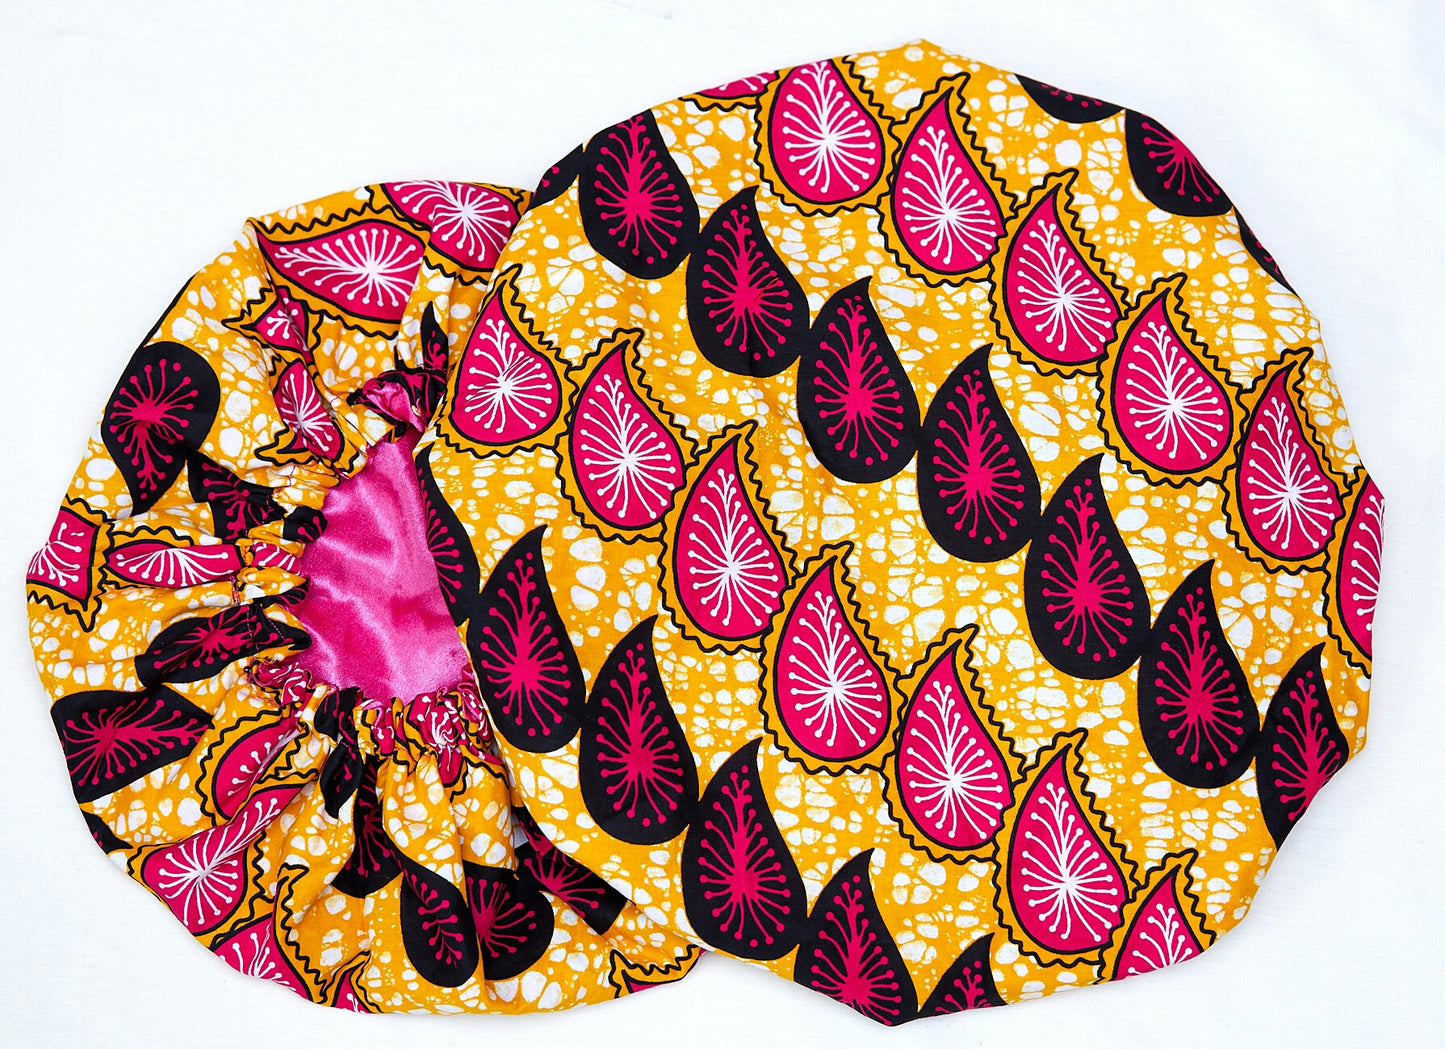 Ankara Wax Print Made of Gold, Pink and Black Blended Beautiful Colours And Pattern, Hand Made Elastic Silklined Bonnet With Band